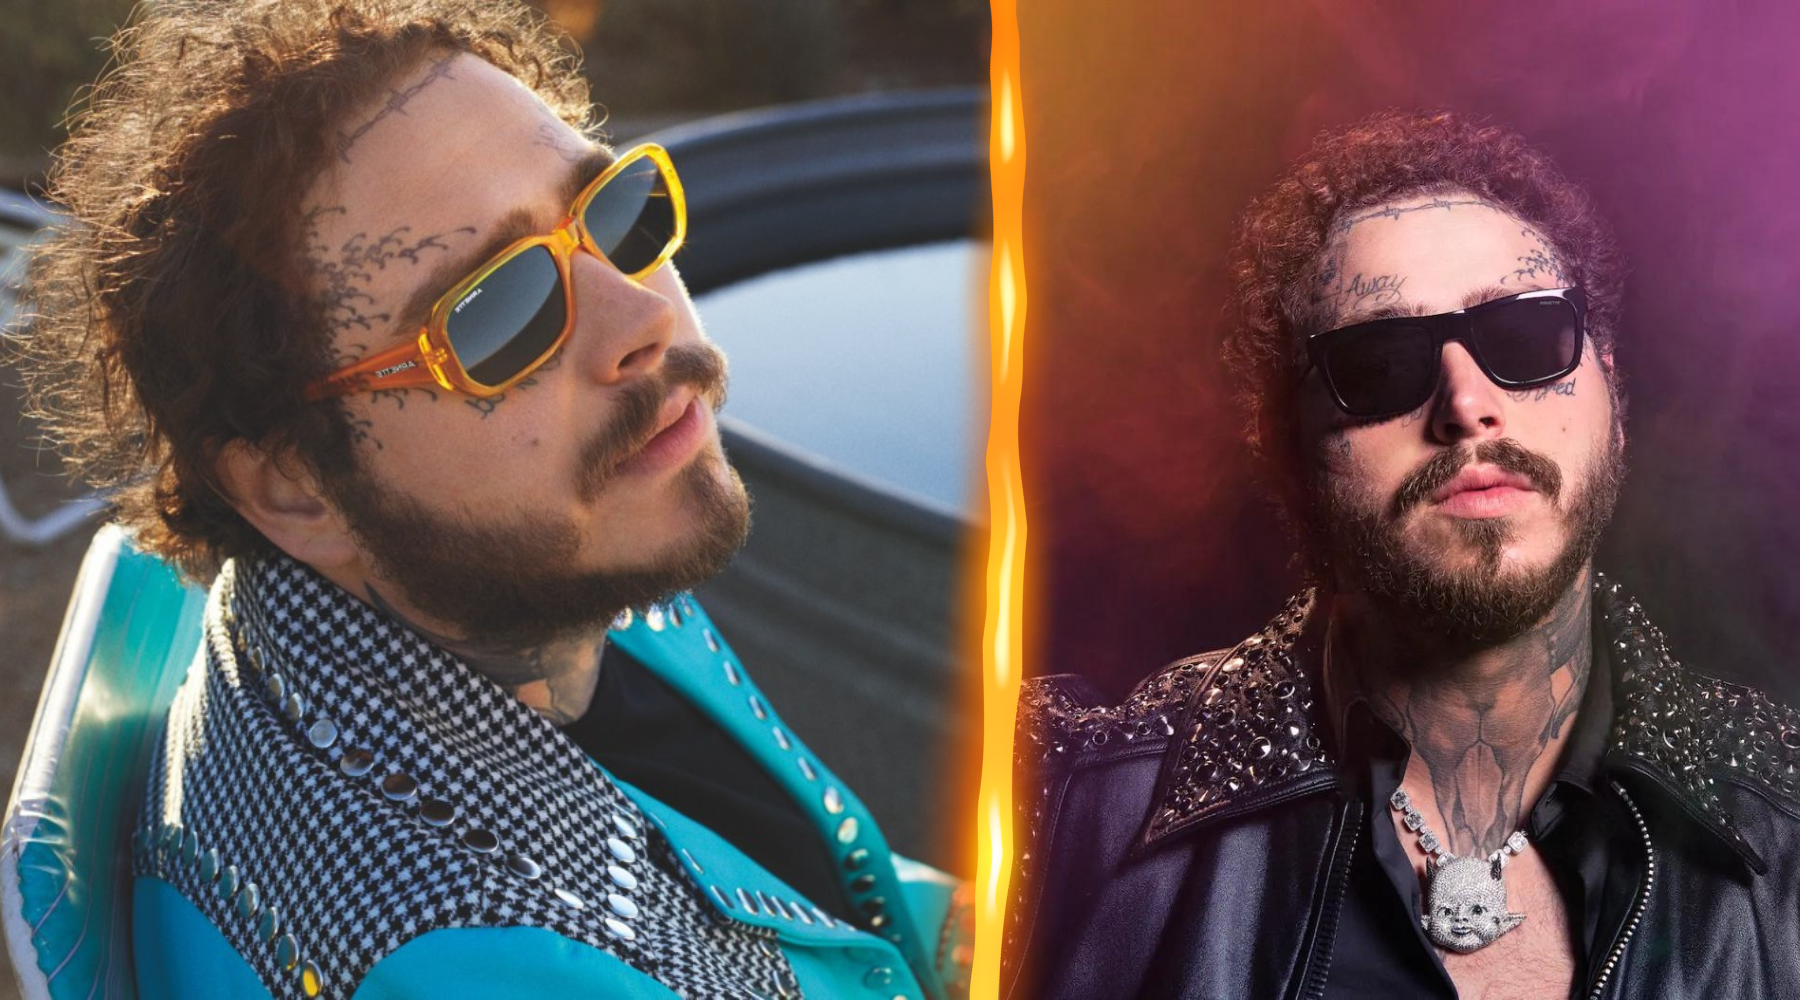 Get the Look: Channel Post Malone's Rockstar Vibe with Arnette Sunglasses